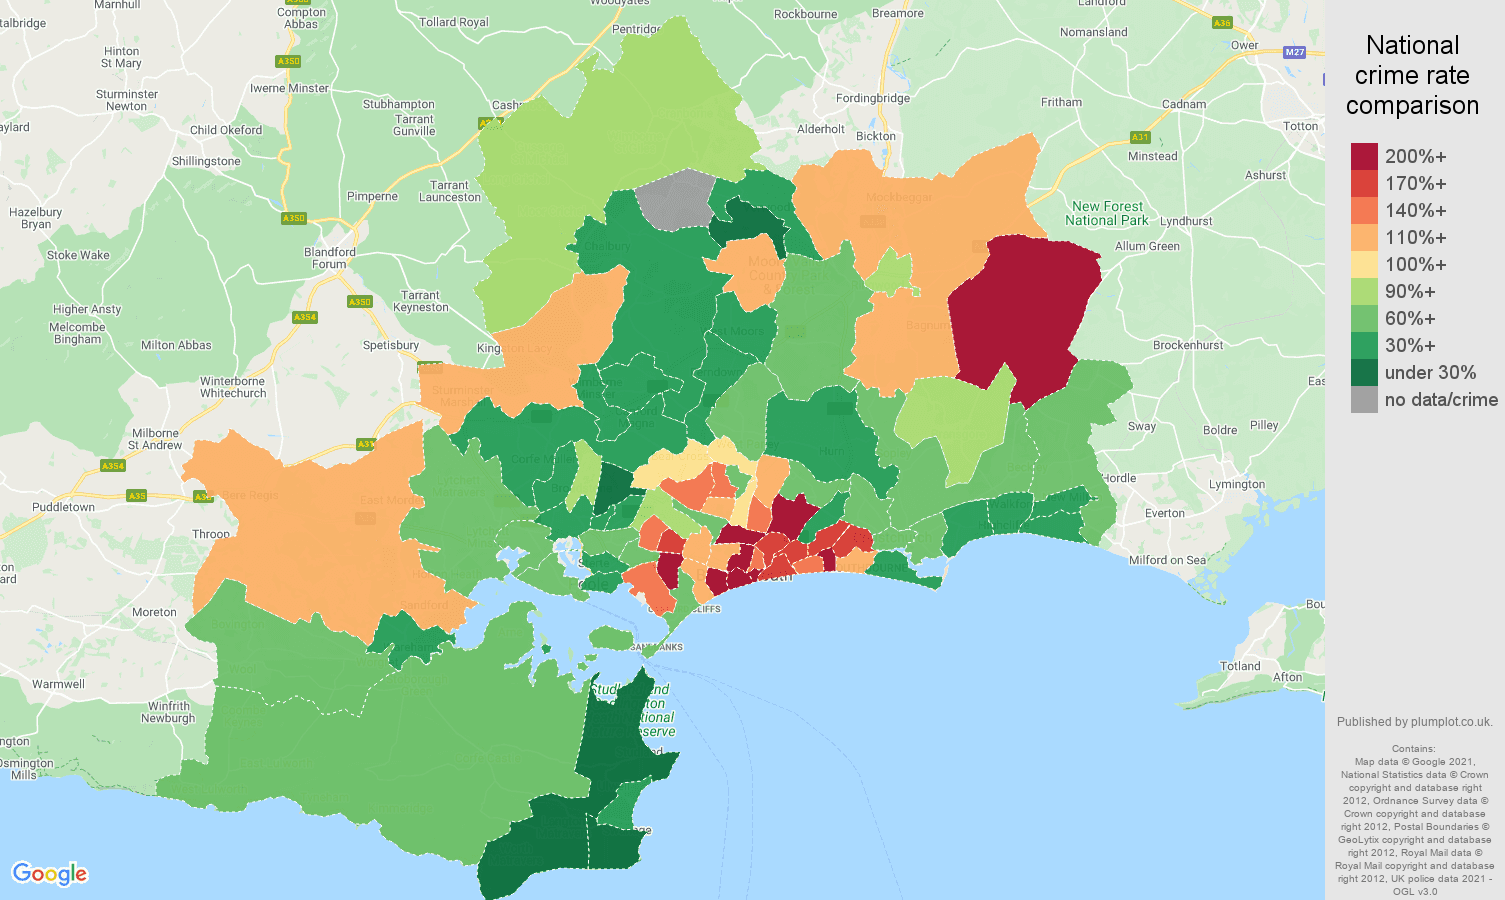 Bournemouth vehicle crime rate comparison map